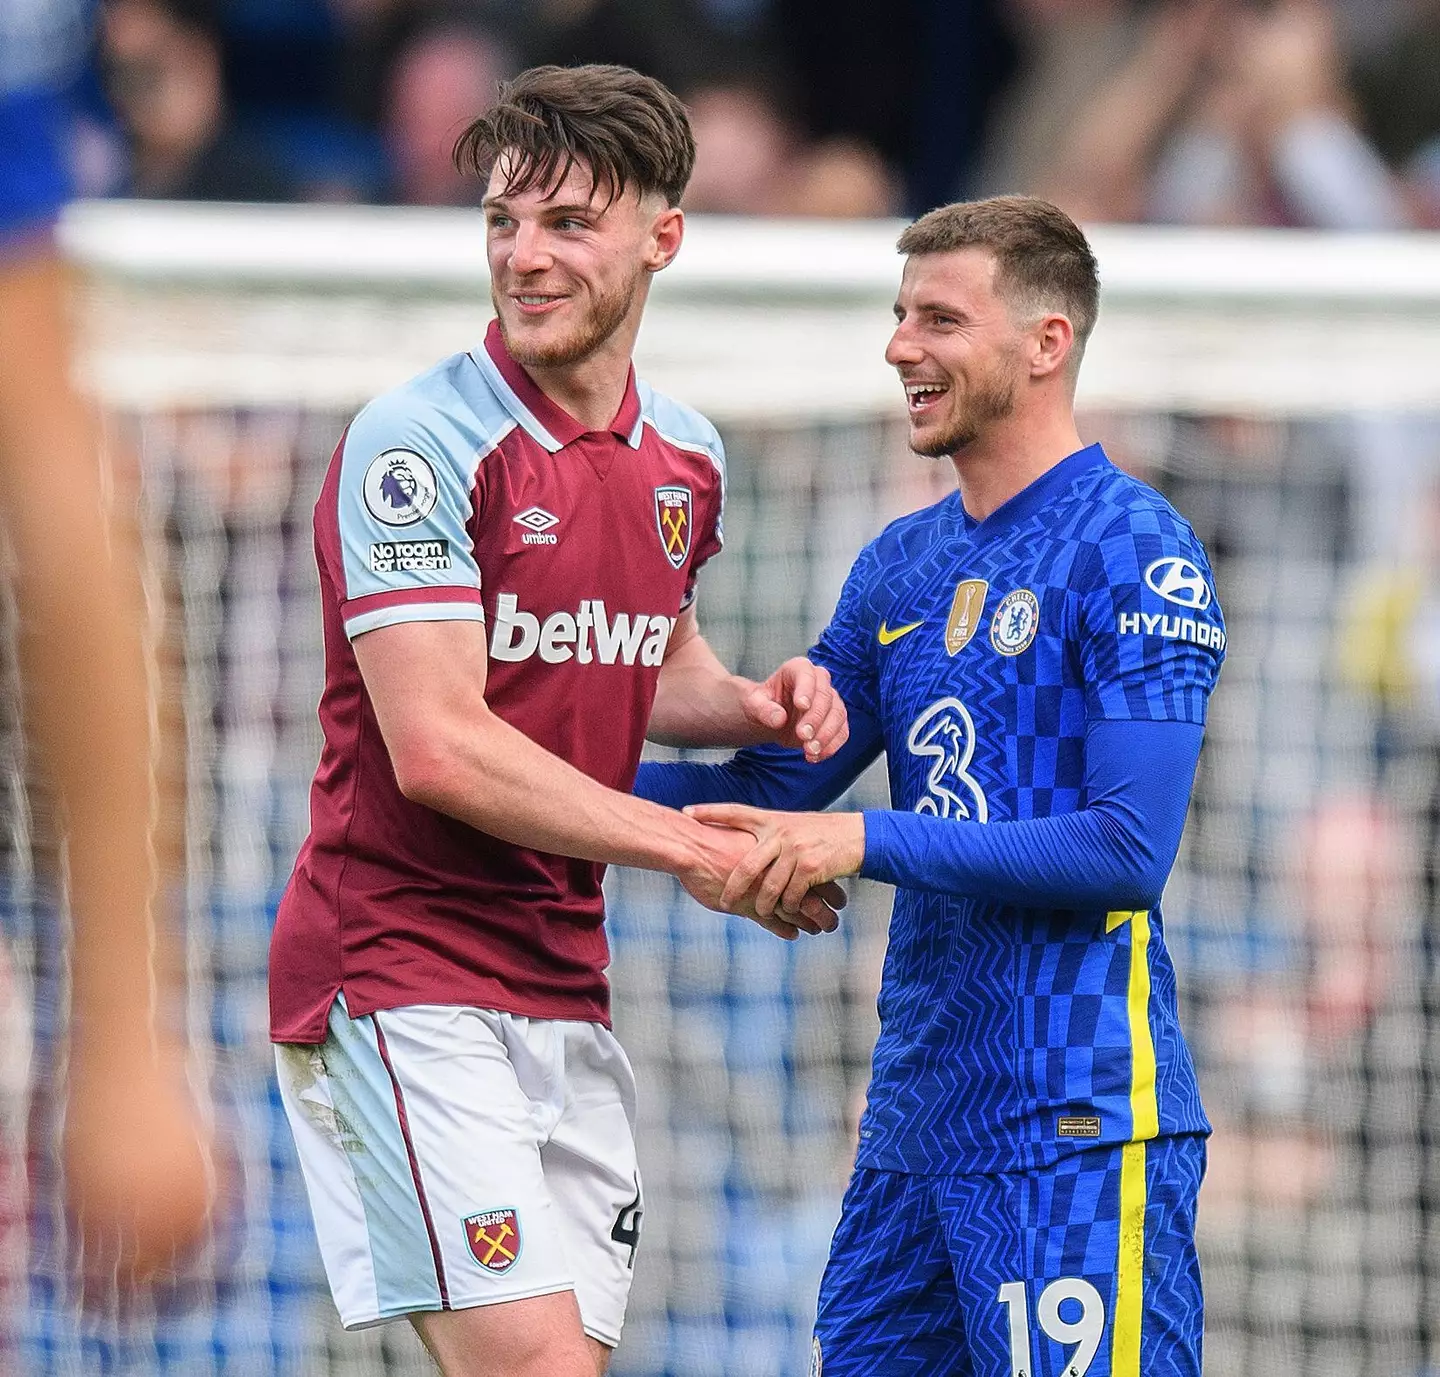 Mason Mount and Declan Rice during a Premier League match at Stamford Bridge. (Alamy)